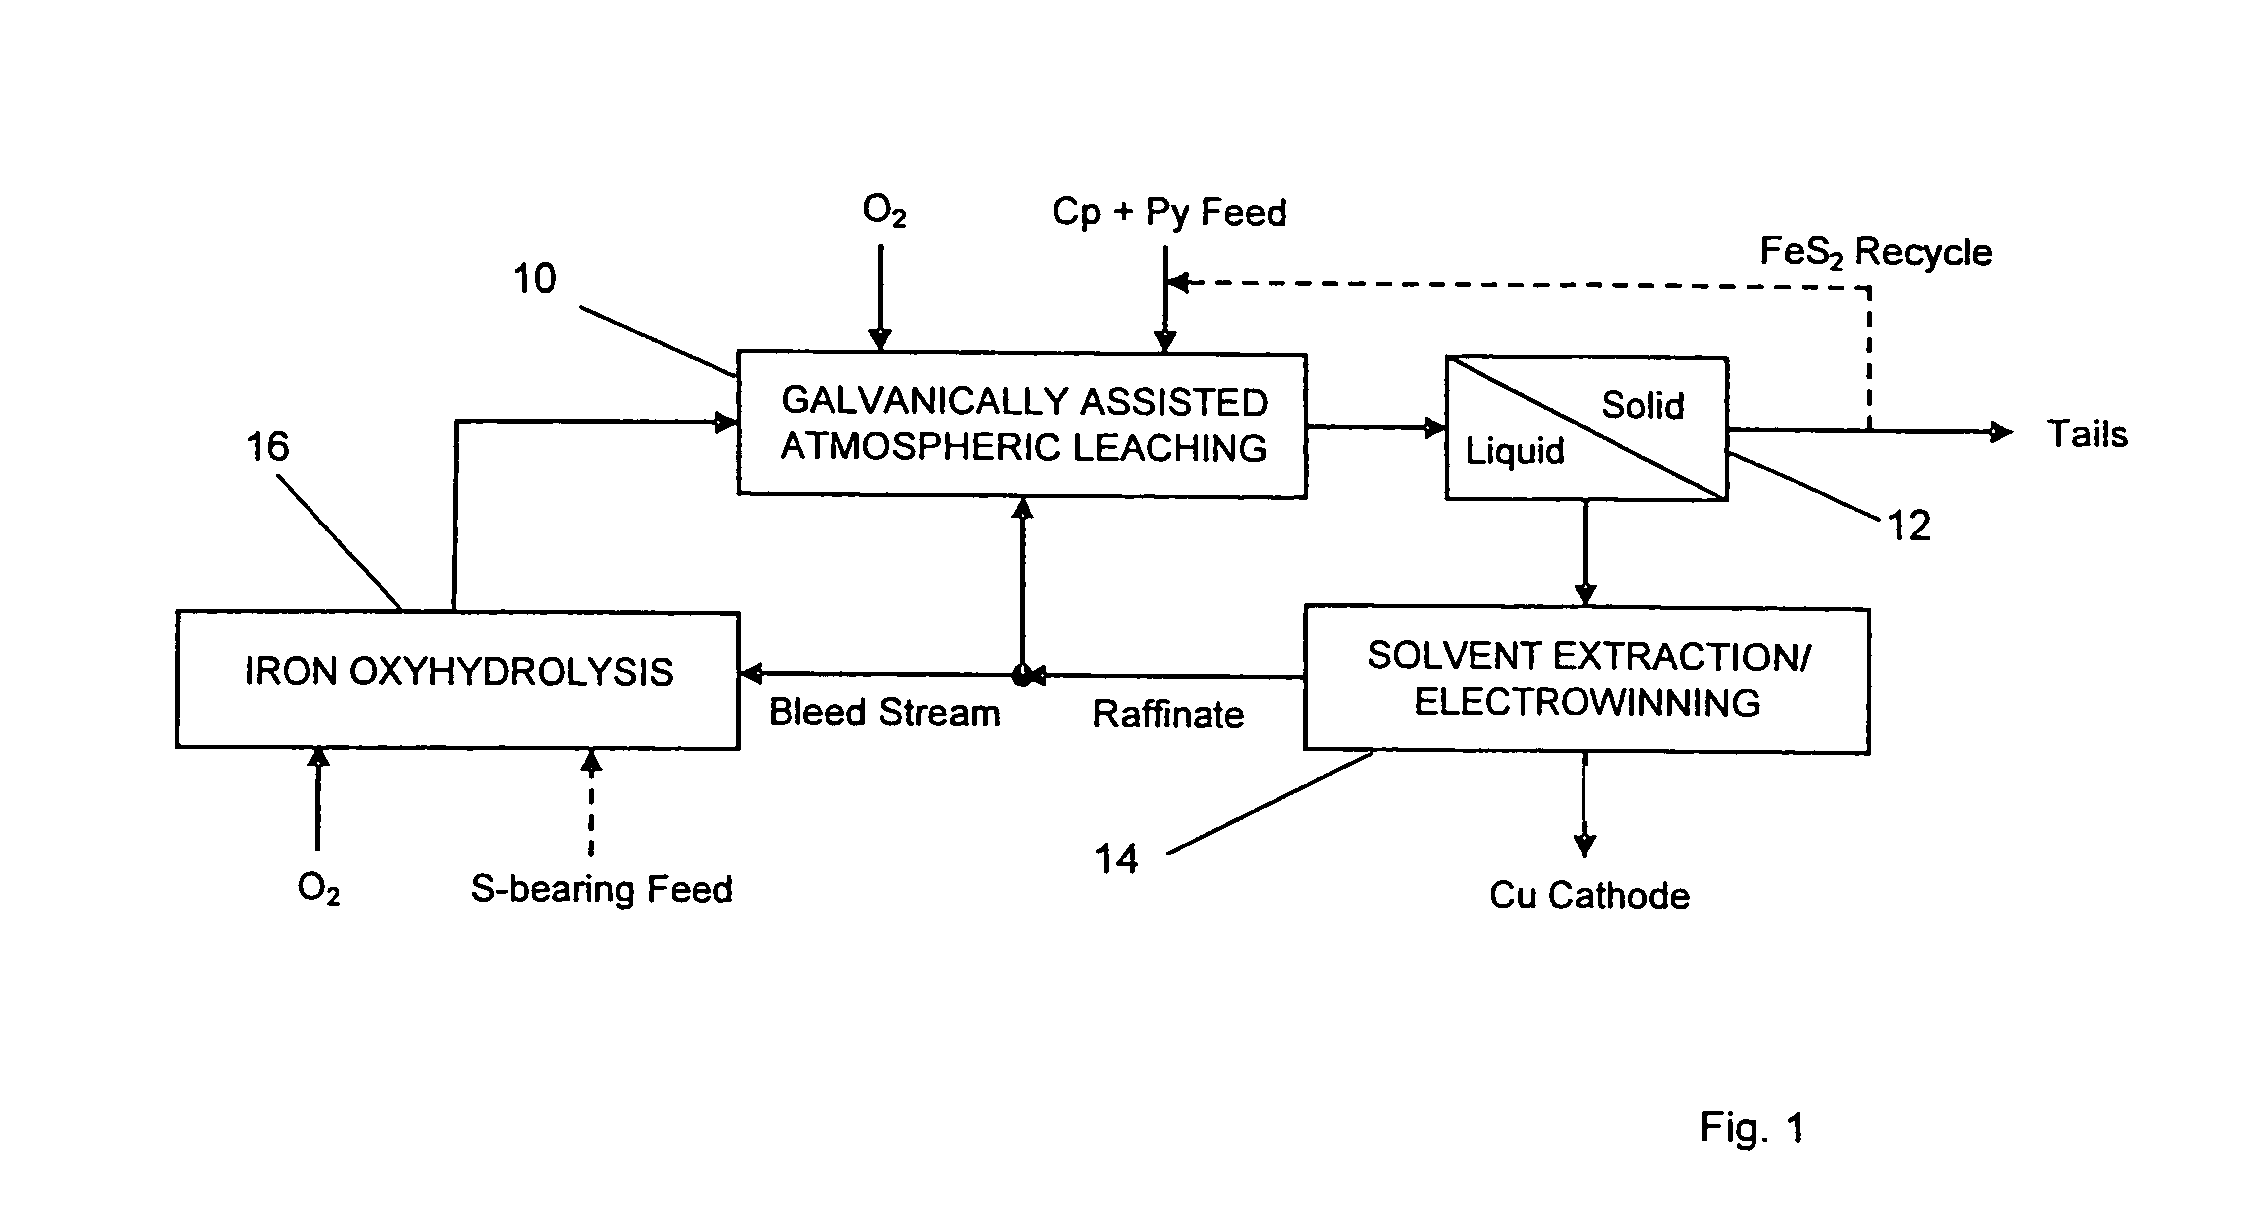 Leaching process for copper concentrates